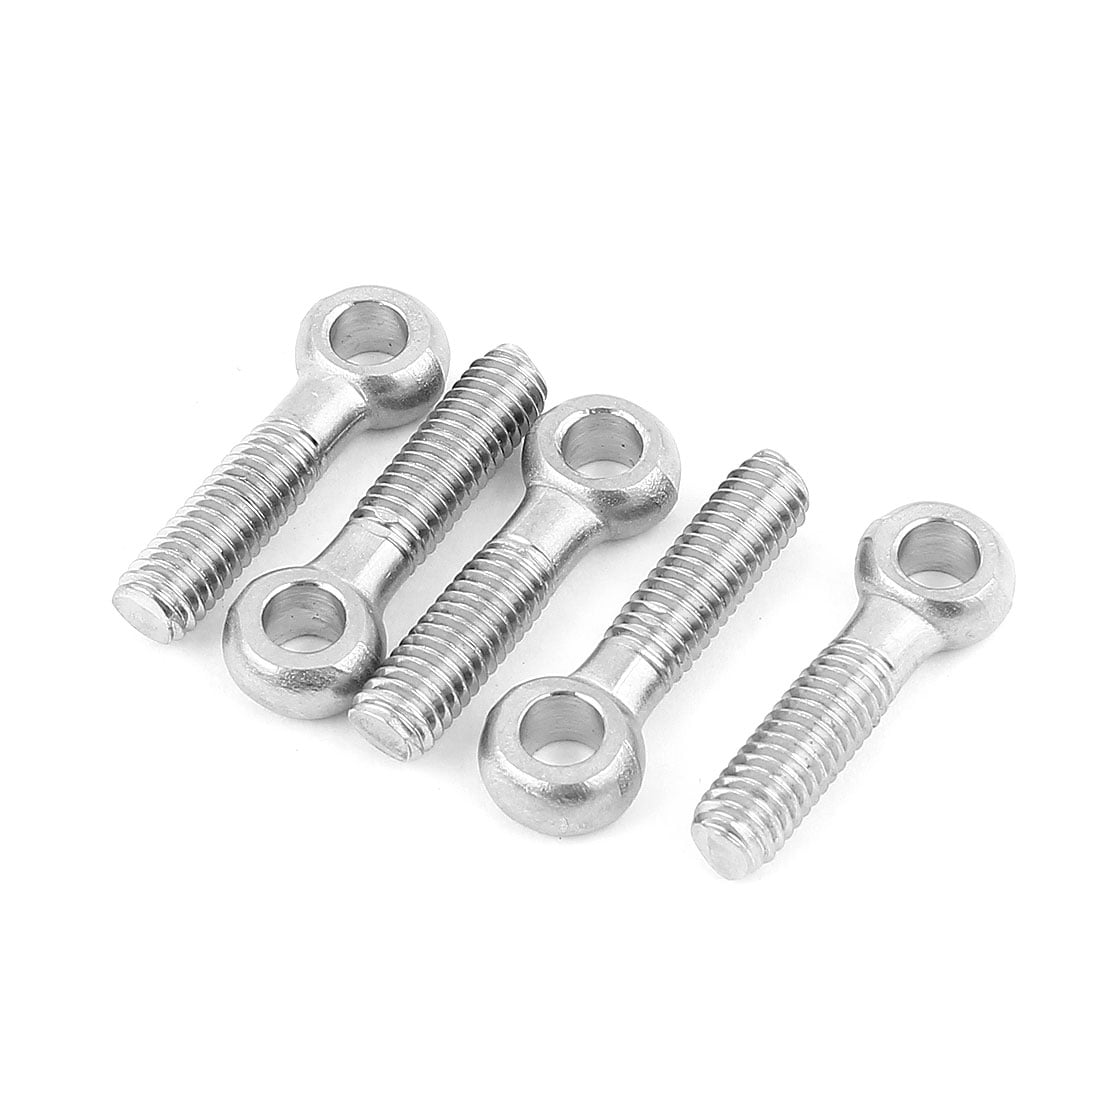 5 Pcs Stainless Steel Fully Threaded Machinery Eye Bolt M6 x 25mm 